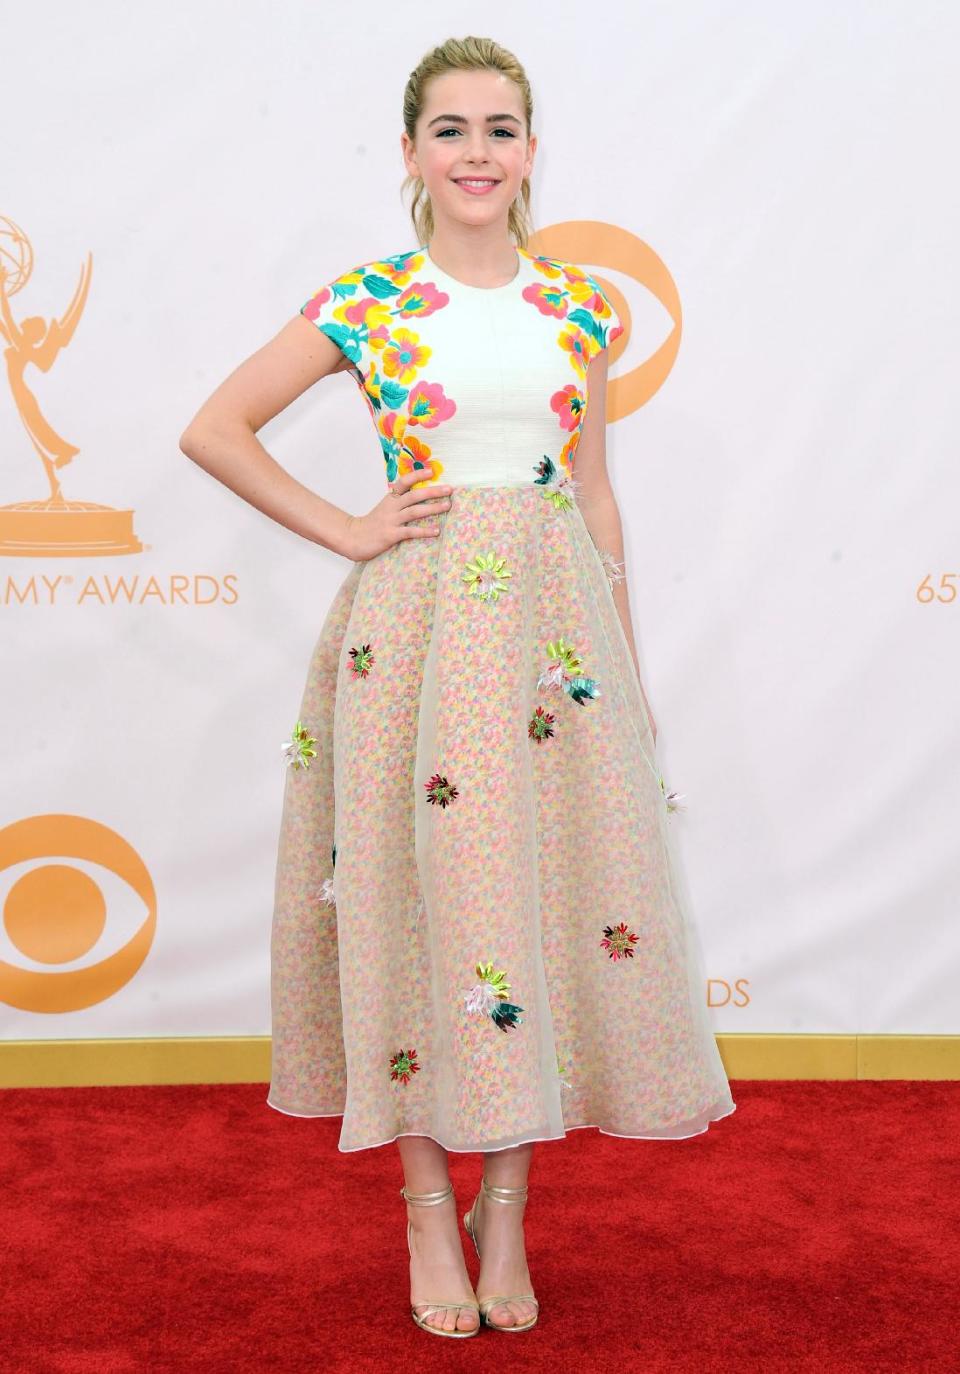 Kiernan Shipka arrives at the 65th Primetime Emmy Awards at Nokia Theatre on Sunday Sept. 22, 2013, in Los Angeles. (Photo by Jordan Strauss/Invision/AP)